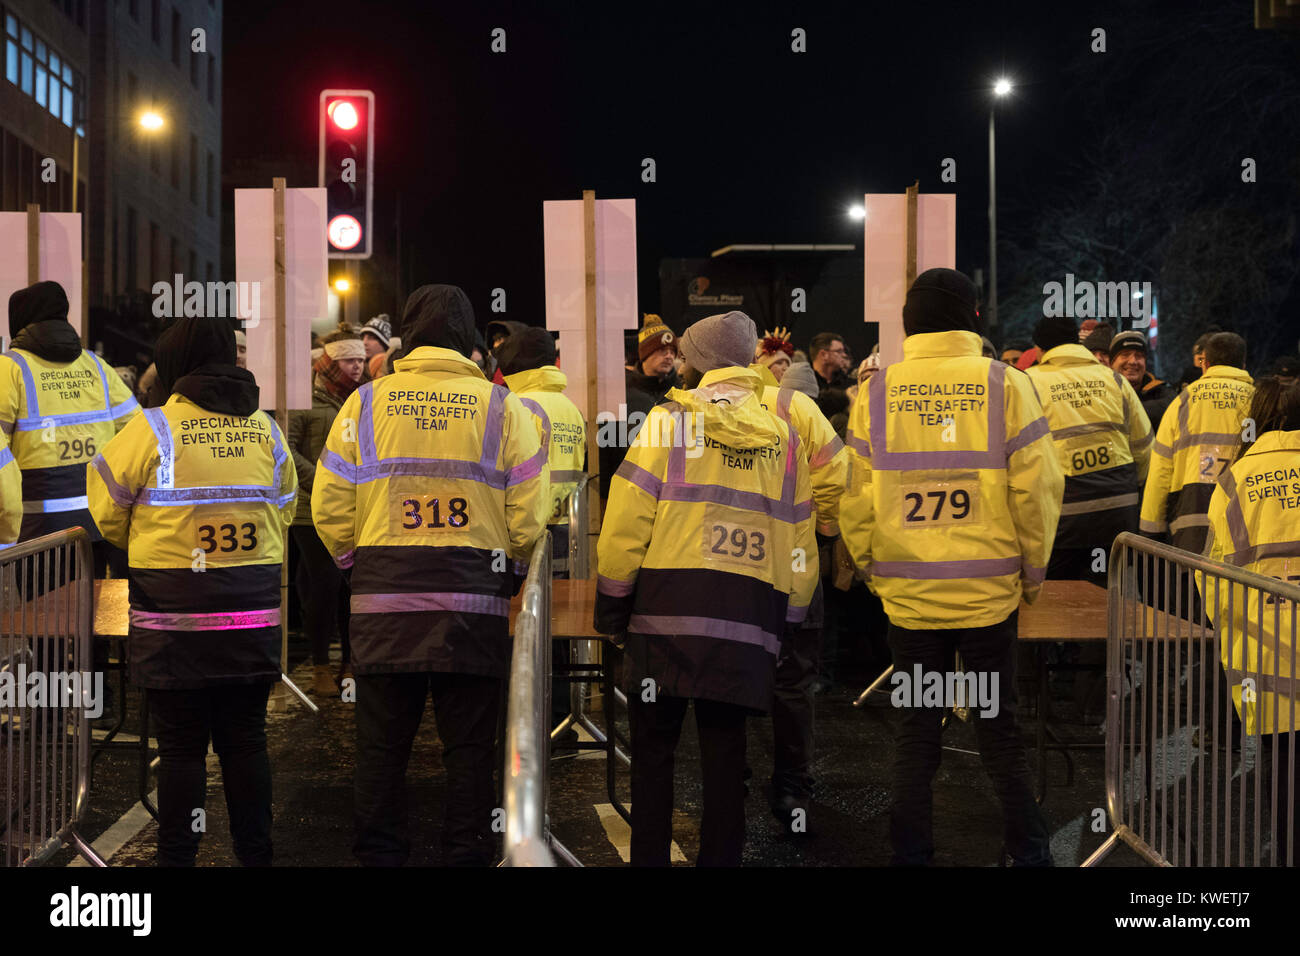 Security team minutes before gates are opened at  Edinburgh Hogmanay street party in the city on New Year's Eve. Scotland, United Kingdom. Stock Photo